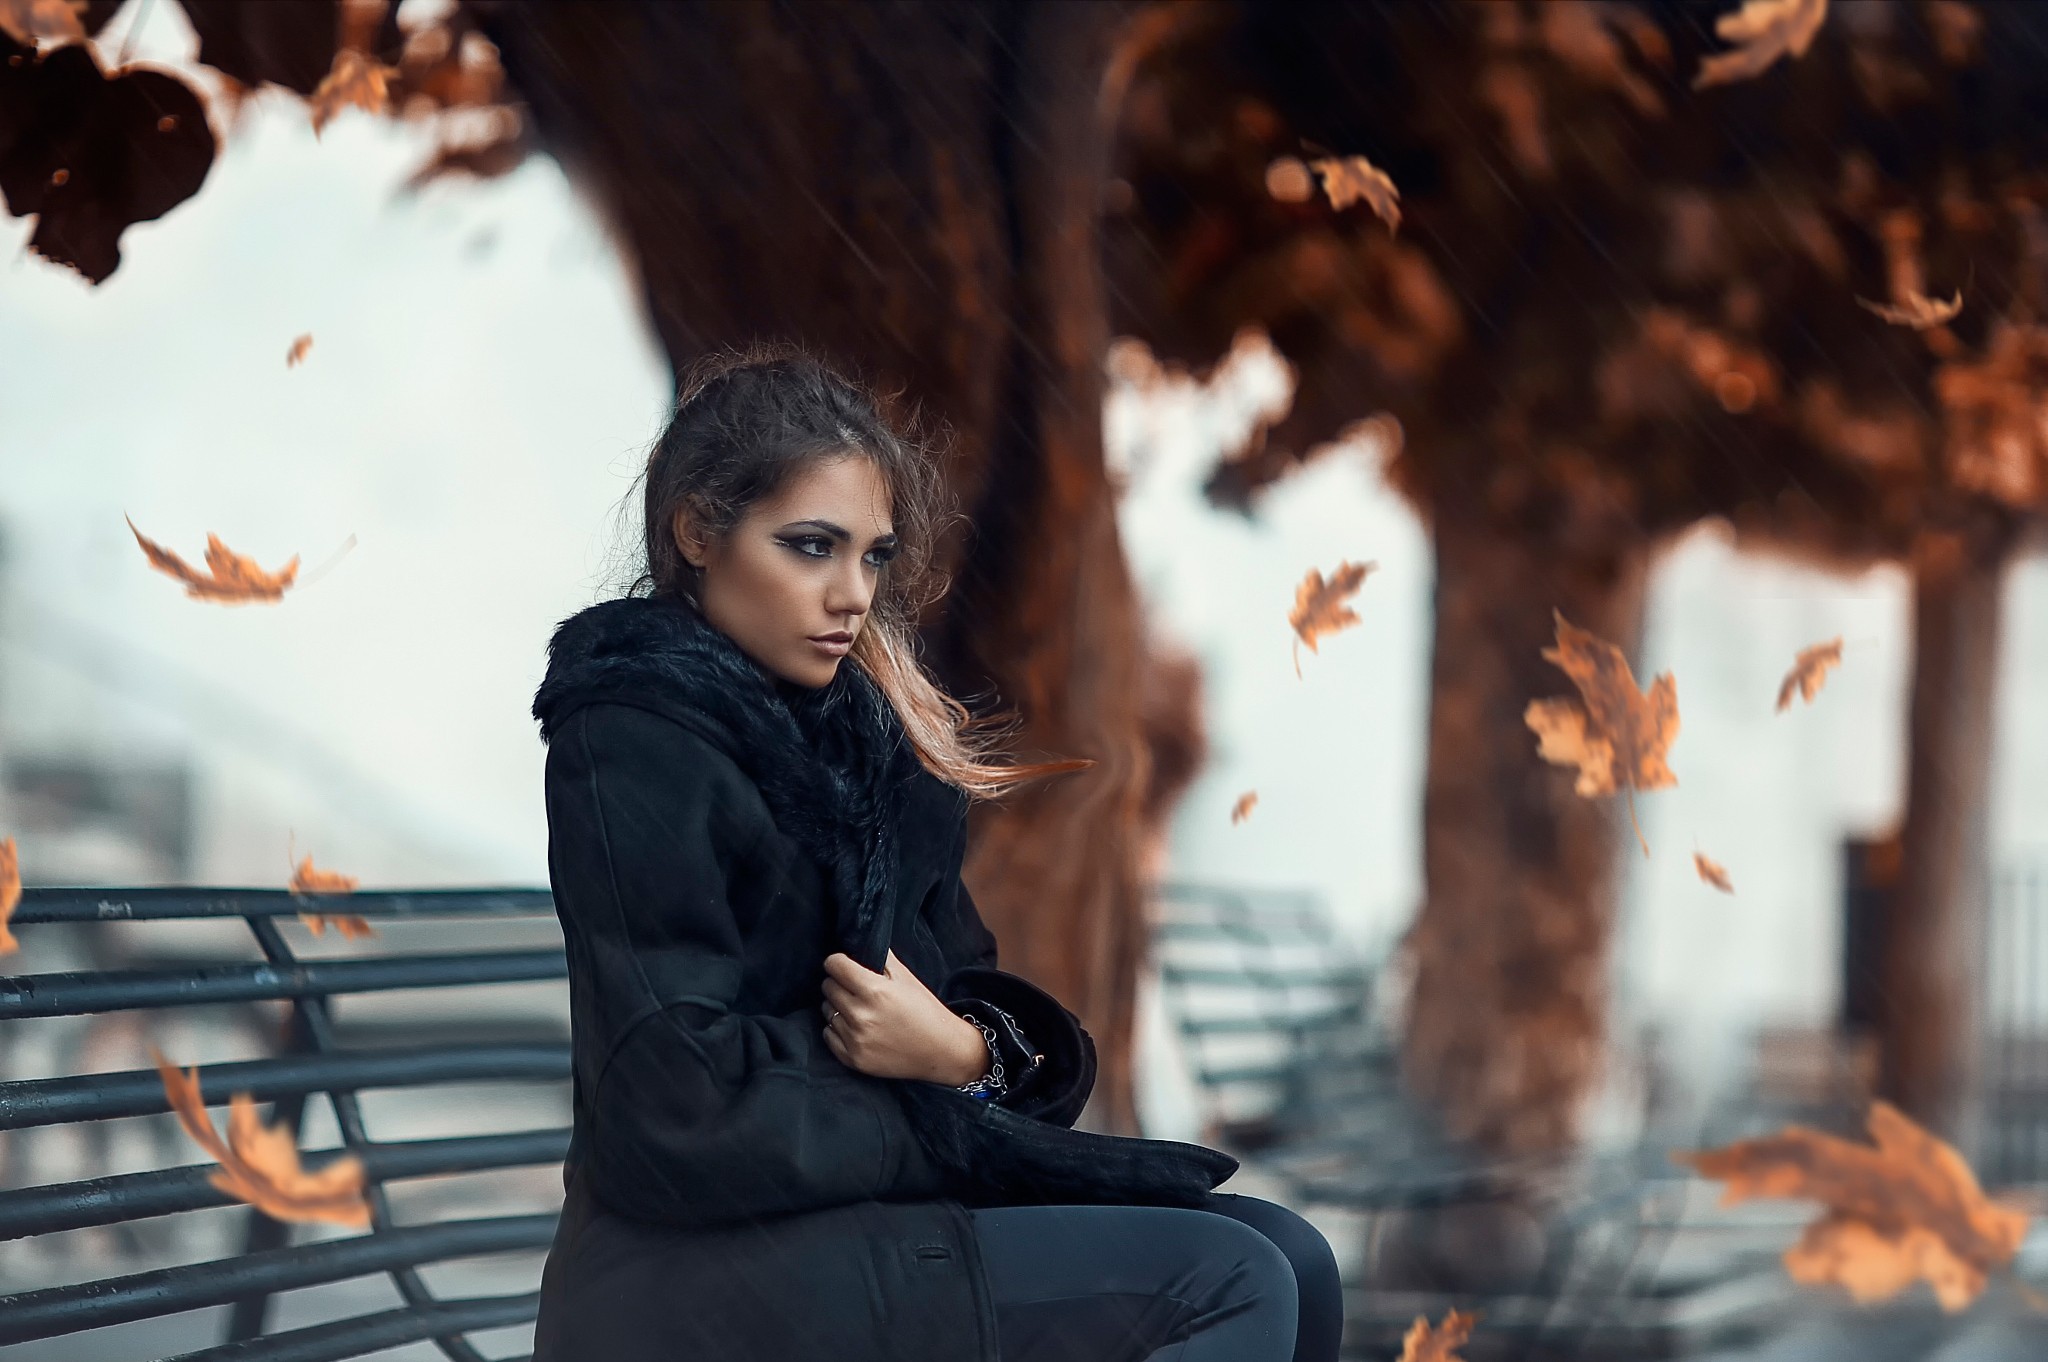 People 2048x1362 women leaves bench women outdoors fall Alessandro Di Cicco black coat on bench Arianna Storace coats fallen leaves sitting park makeup eyeliner cold outdoors model autumn women